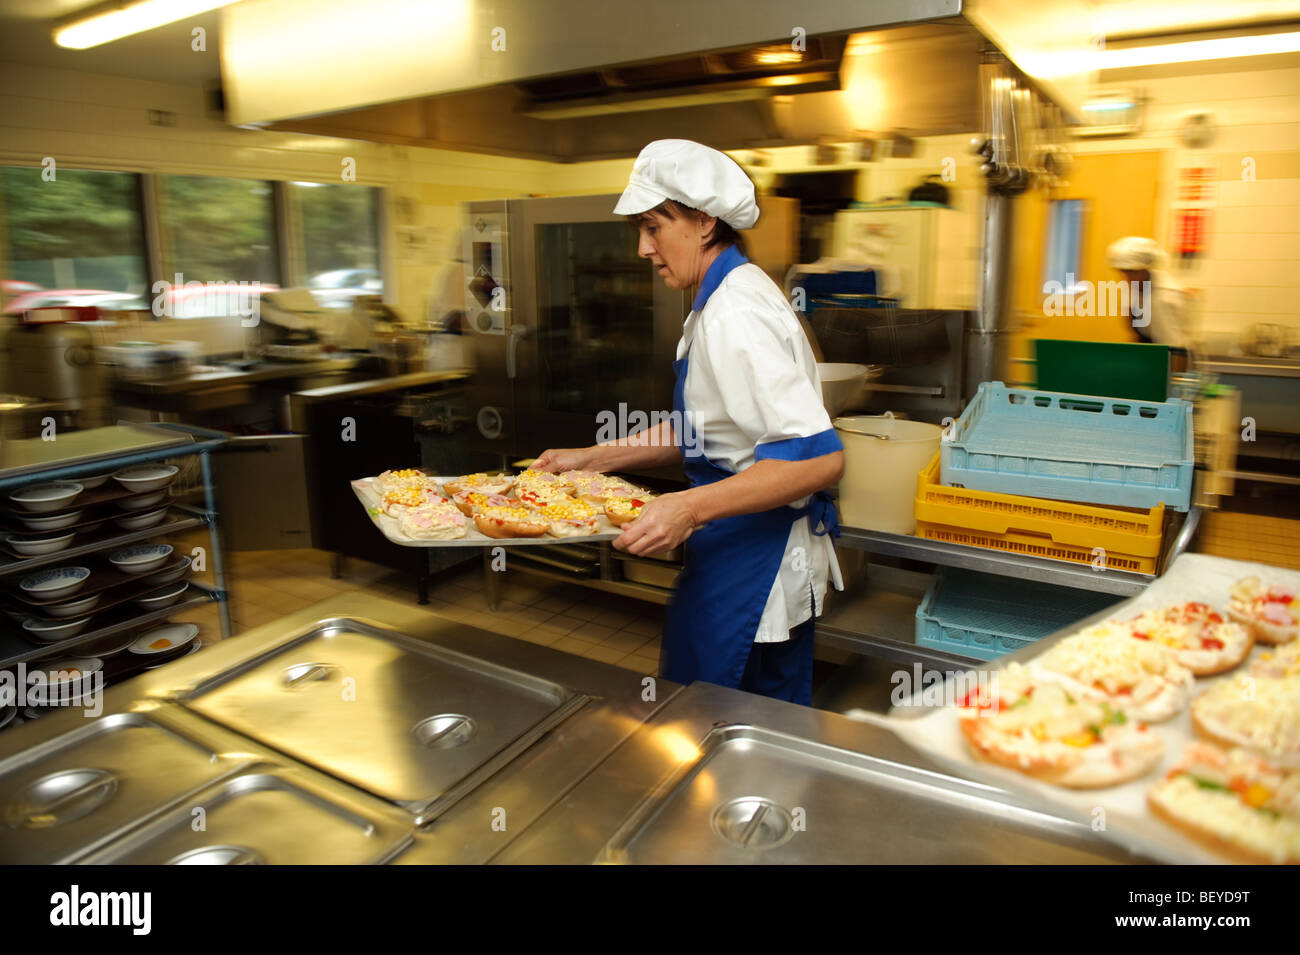 Woman cook in a primary school canteen kitchen about to cook a tray of pizzas for lunch, UK Stock Photo